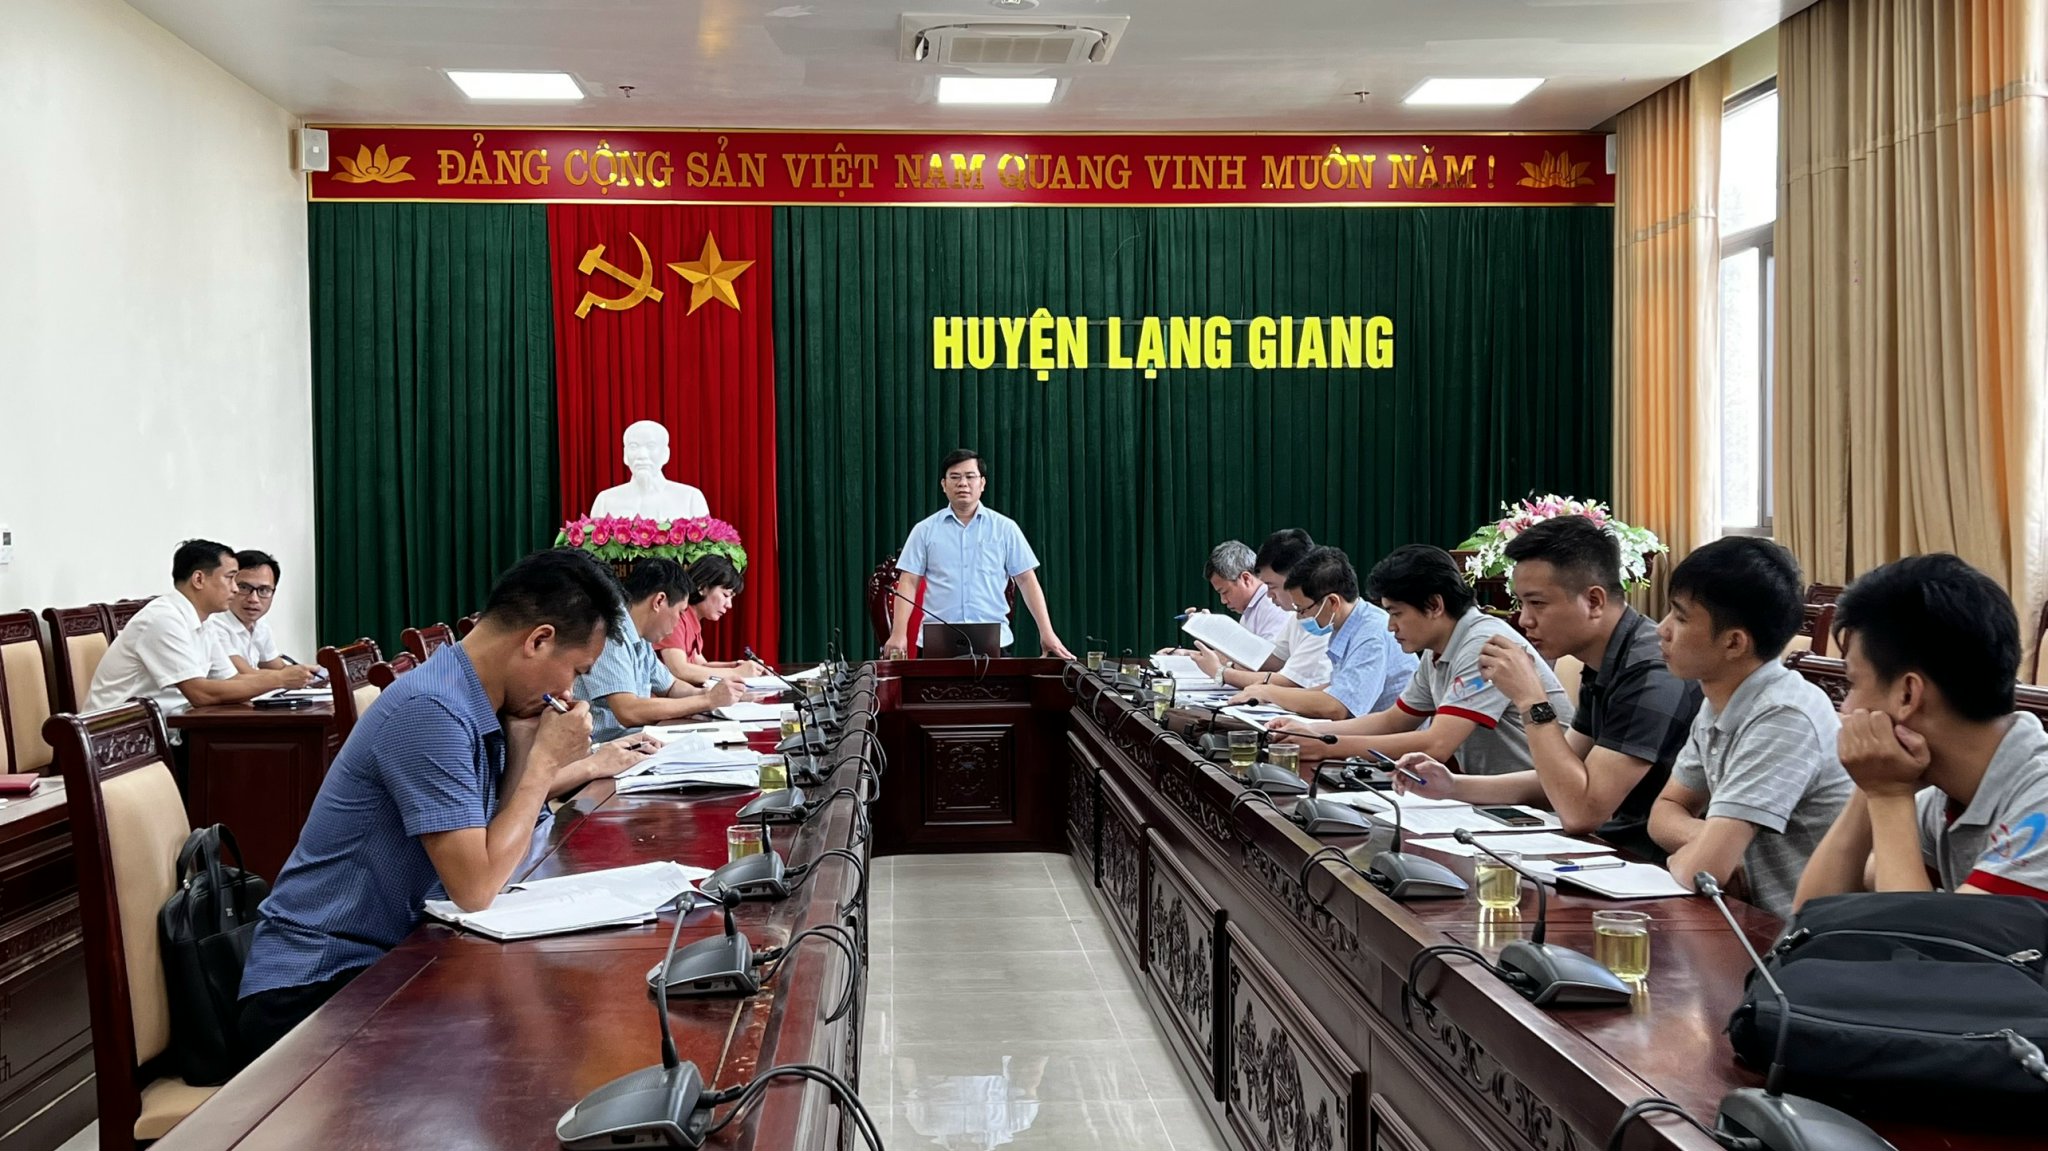 Bac Giang’s VILG Management Board inspects project implementation in the districts|https://stnmt.bacgiang.gov.vn/en_GB/detailed-news/-/asset_publisher/u427aQT80iO6/content/bac-giang-s-vilg-management-board-inspects-project-implementation-in-the-districts